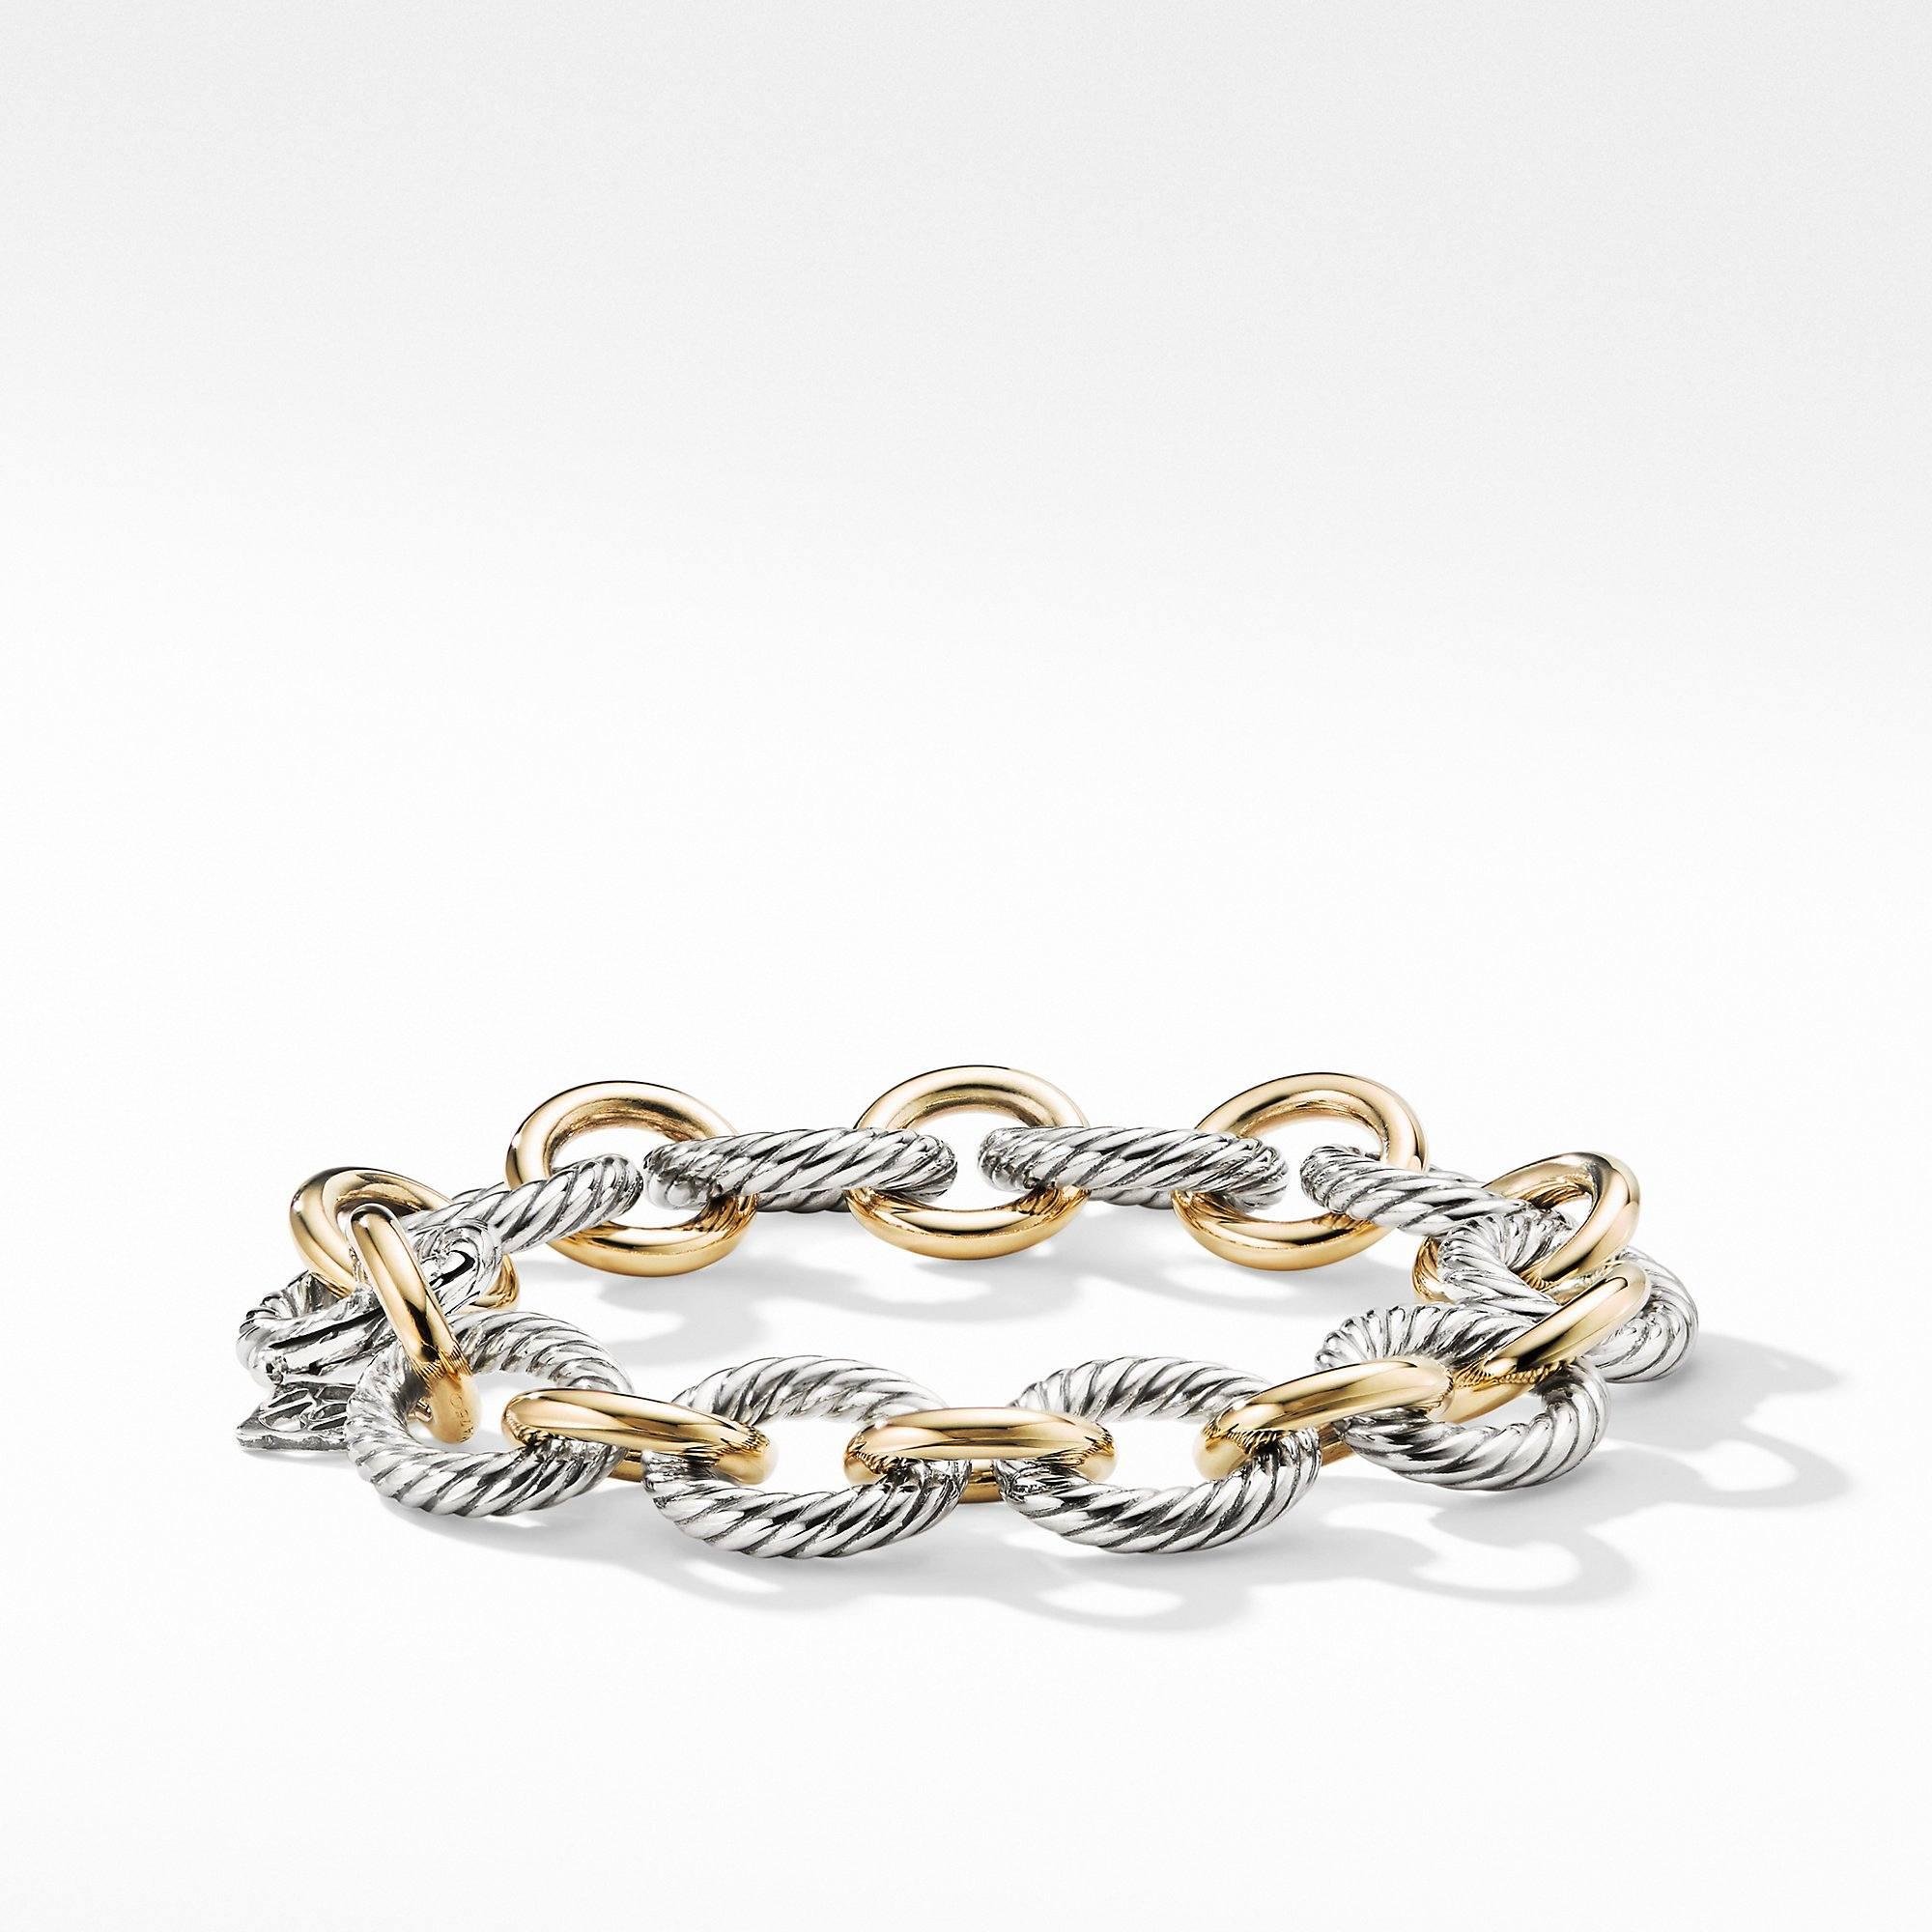 David Yurman Oval Link Chain Bracelet in Sterling Silver and 18k Yellow Gold,  size large | Lee Michaels Fine Jewelry stores